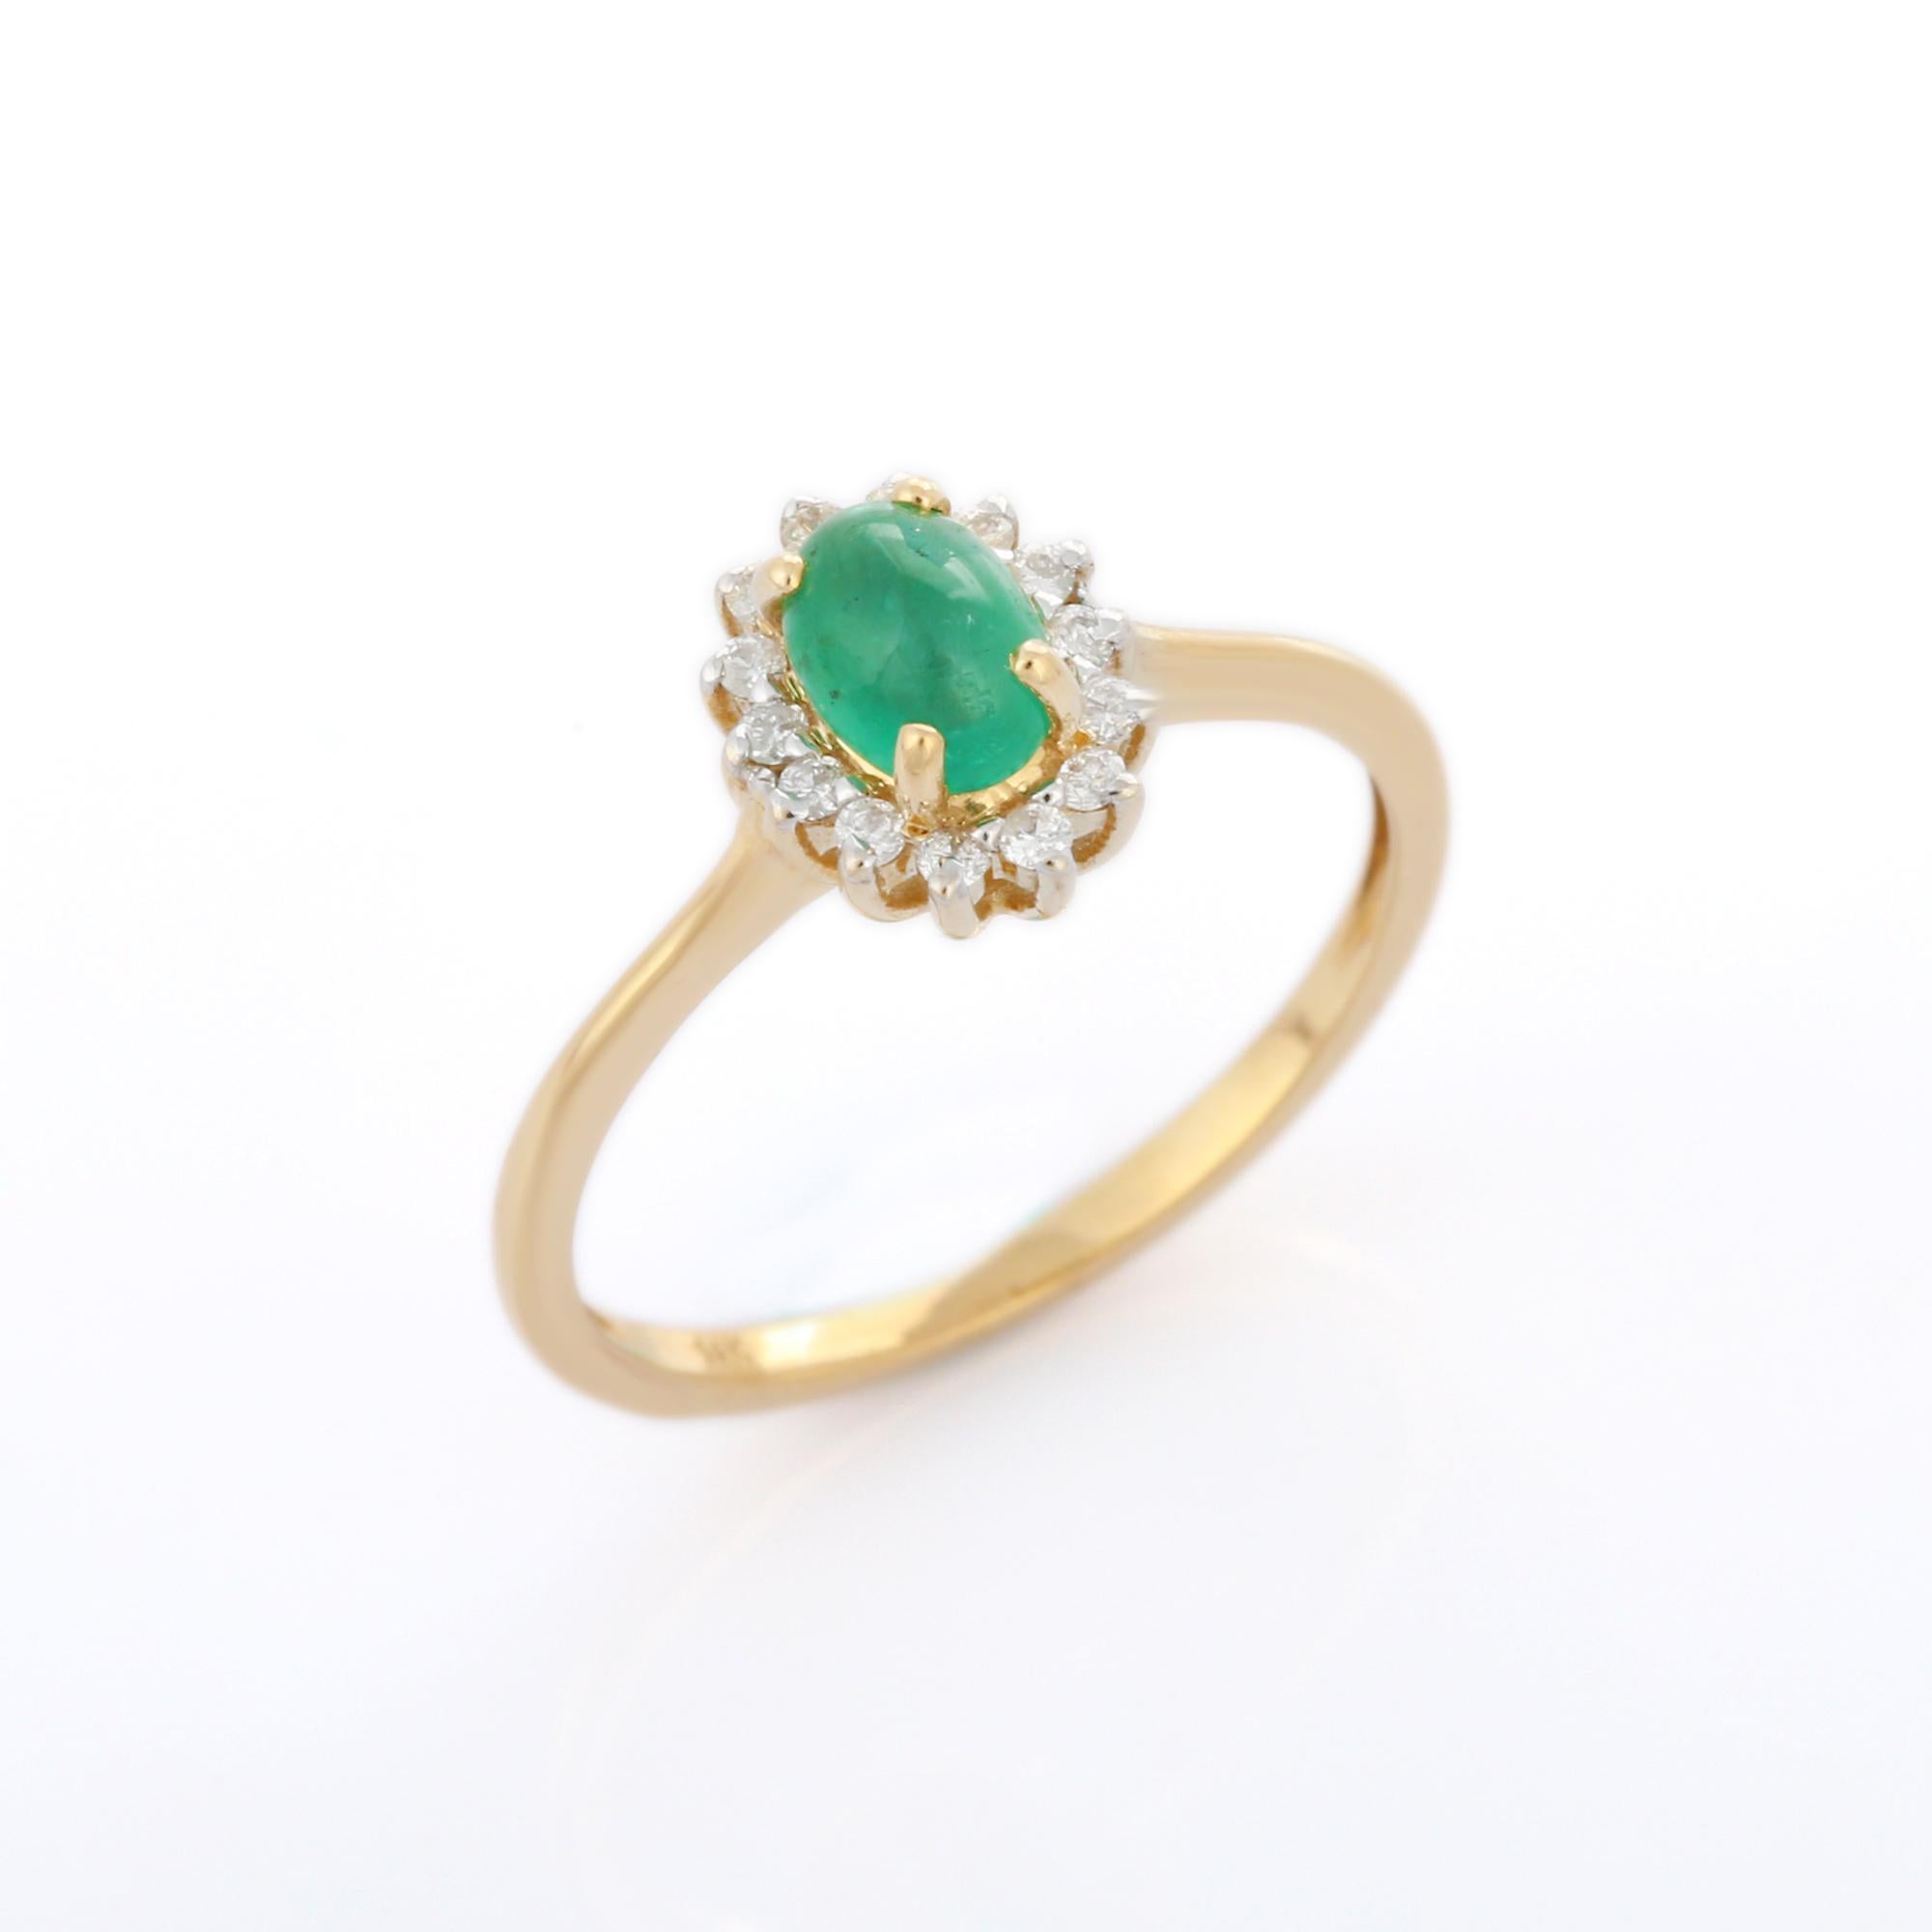 For Sale:  14K Yellow Gold Ring with Oval Cut Emerald and Diamonds, Emerald Halo Ring 2